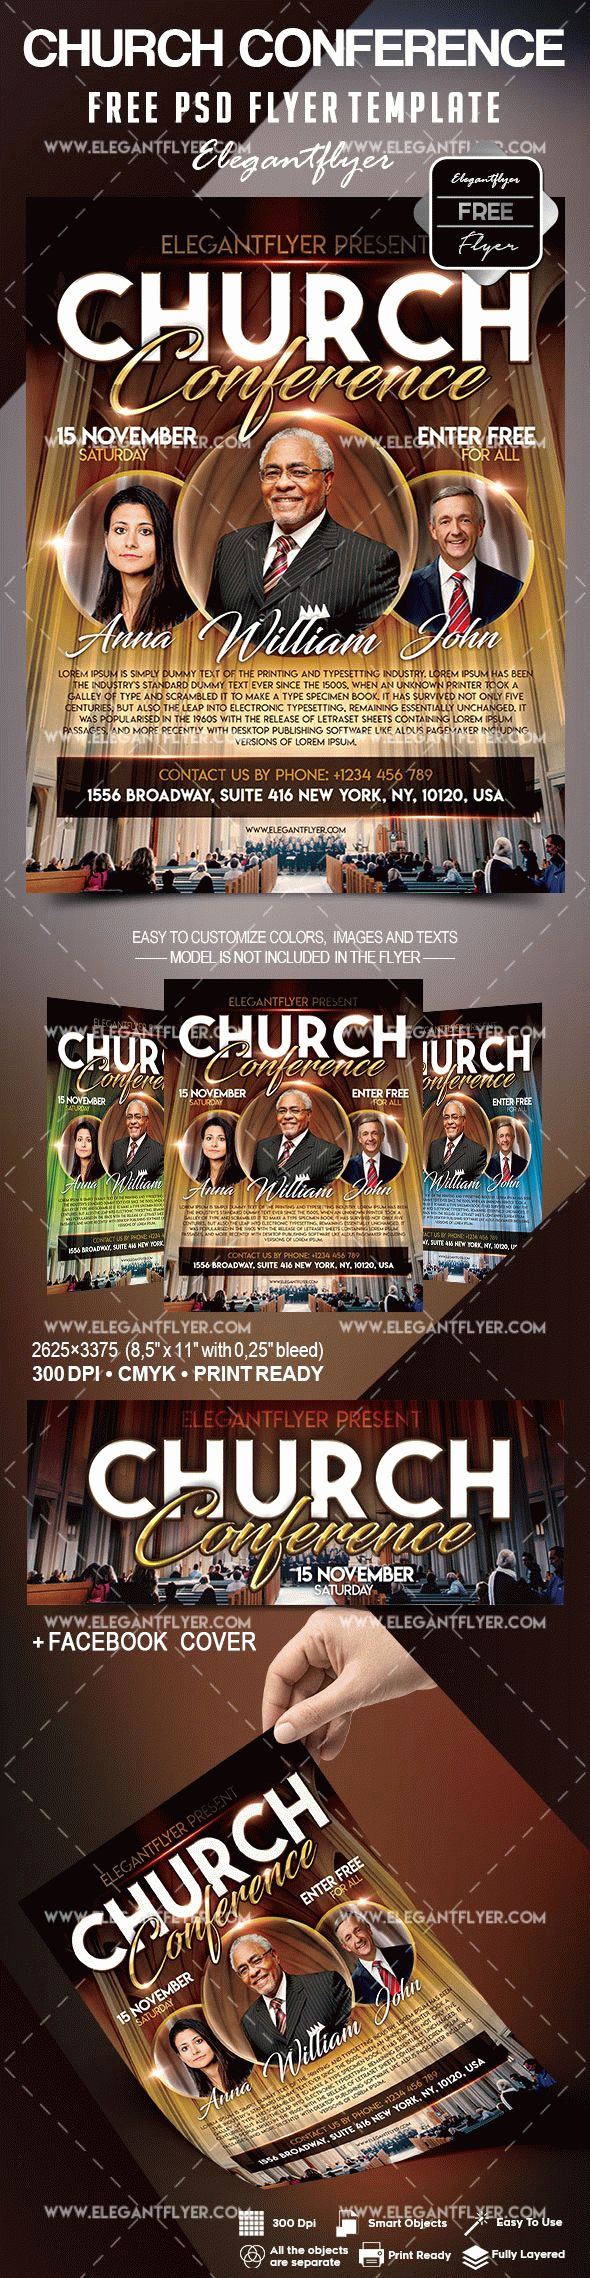 Free Church Flyer Templates New Free Church Conference Flyer Template – by Elegantflyer